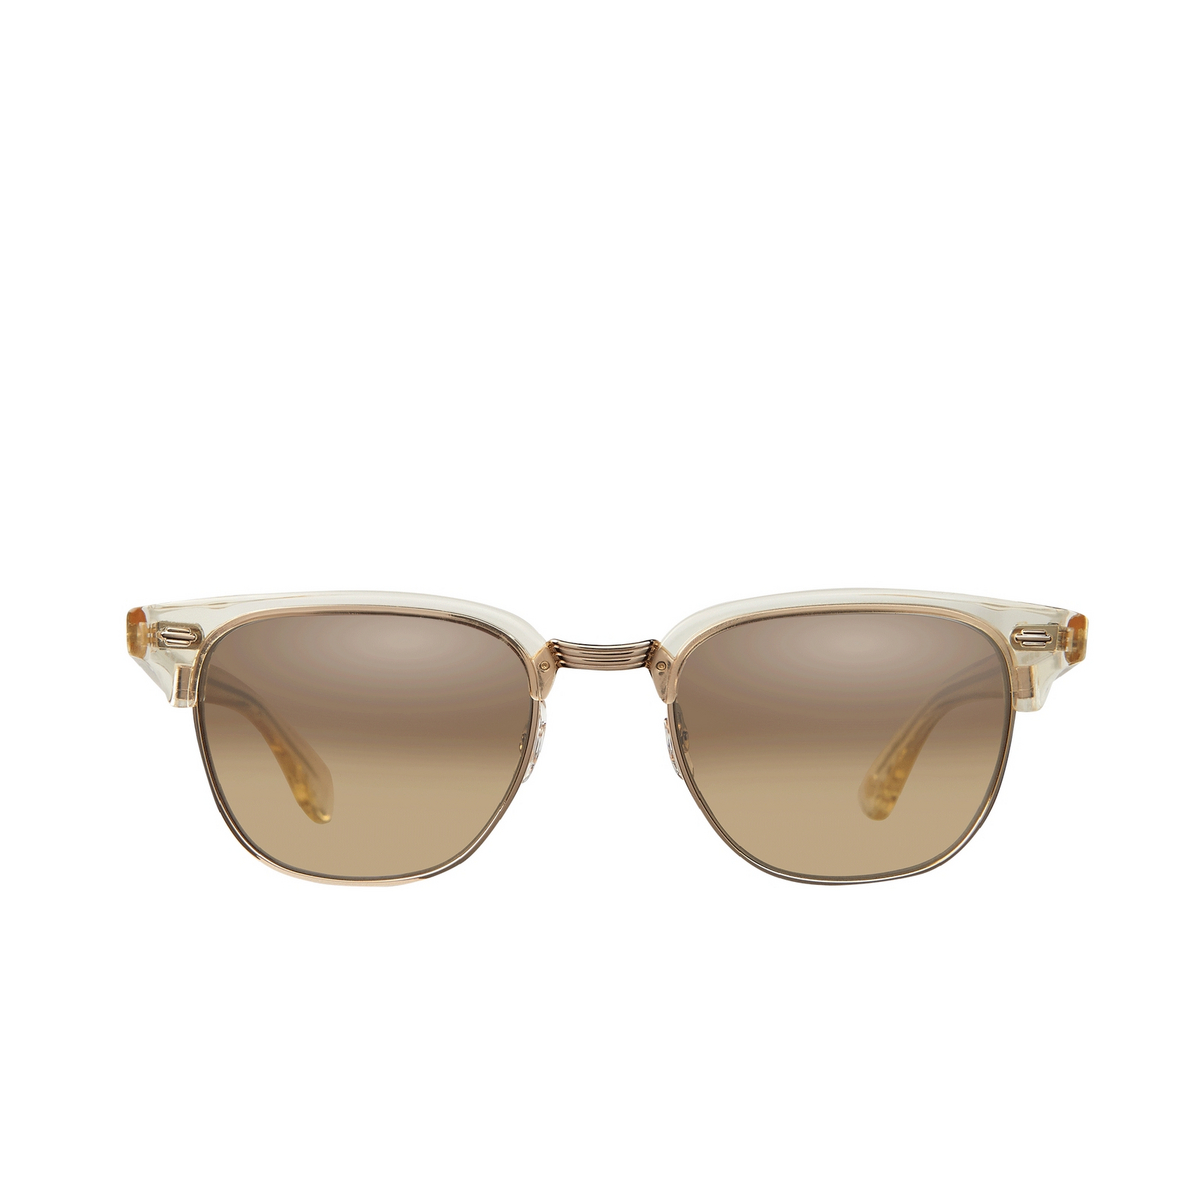 Garrett Leight® Square Sunglasses: Elkgrove Sun color Pg-g/brlm Pure Glass-gold/brown Layered Mirror - front view